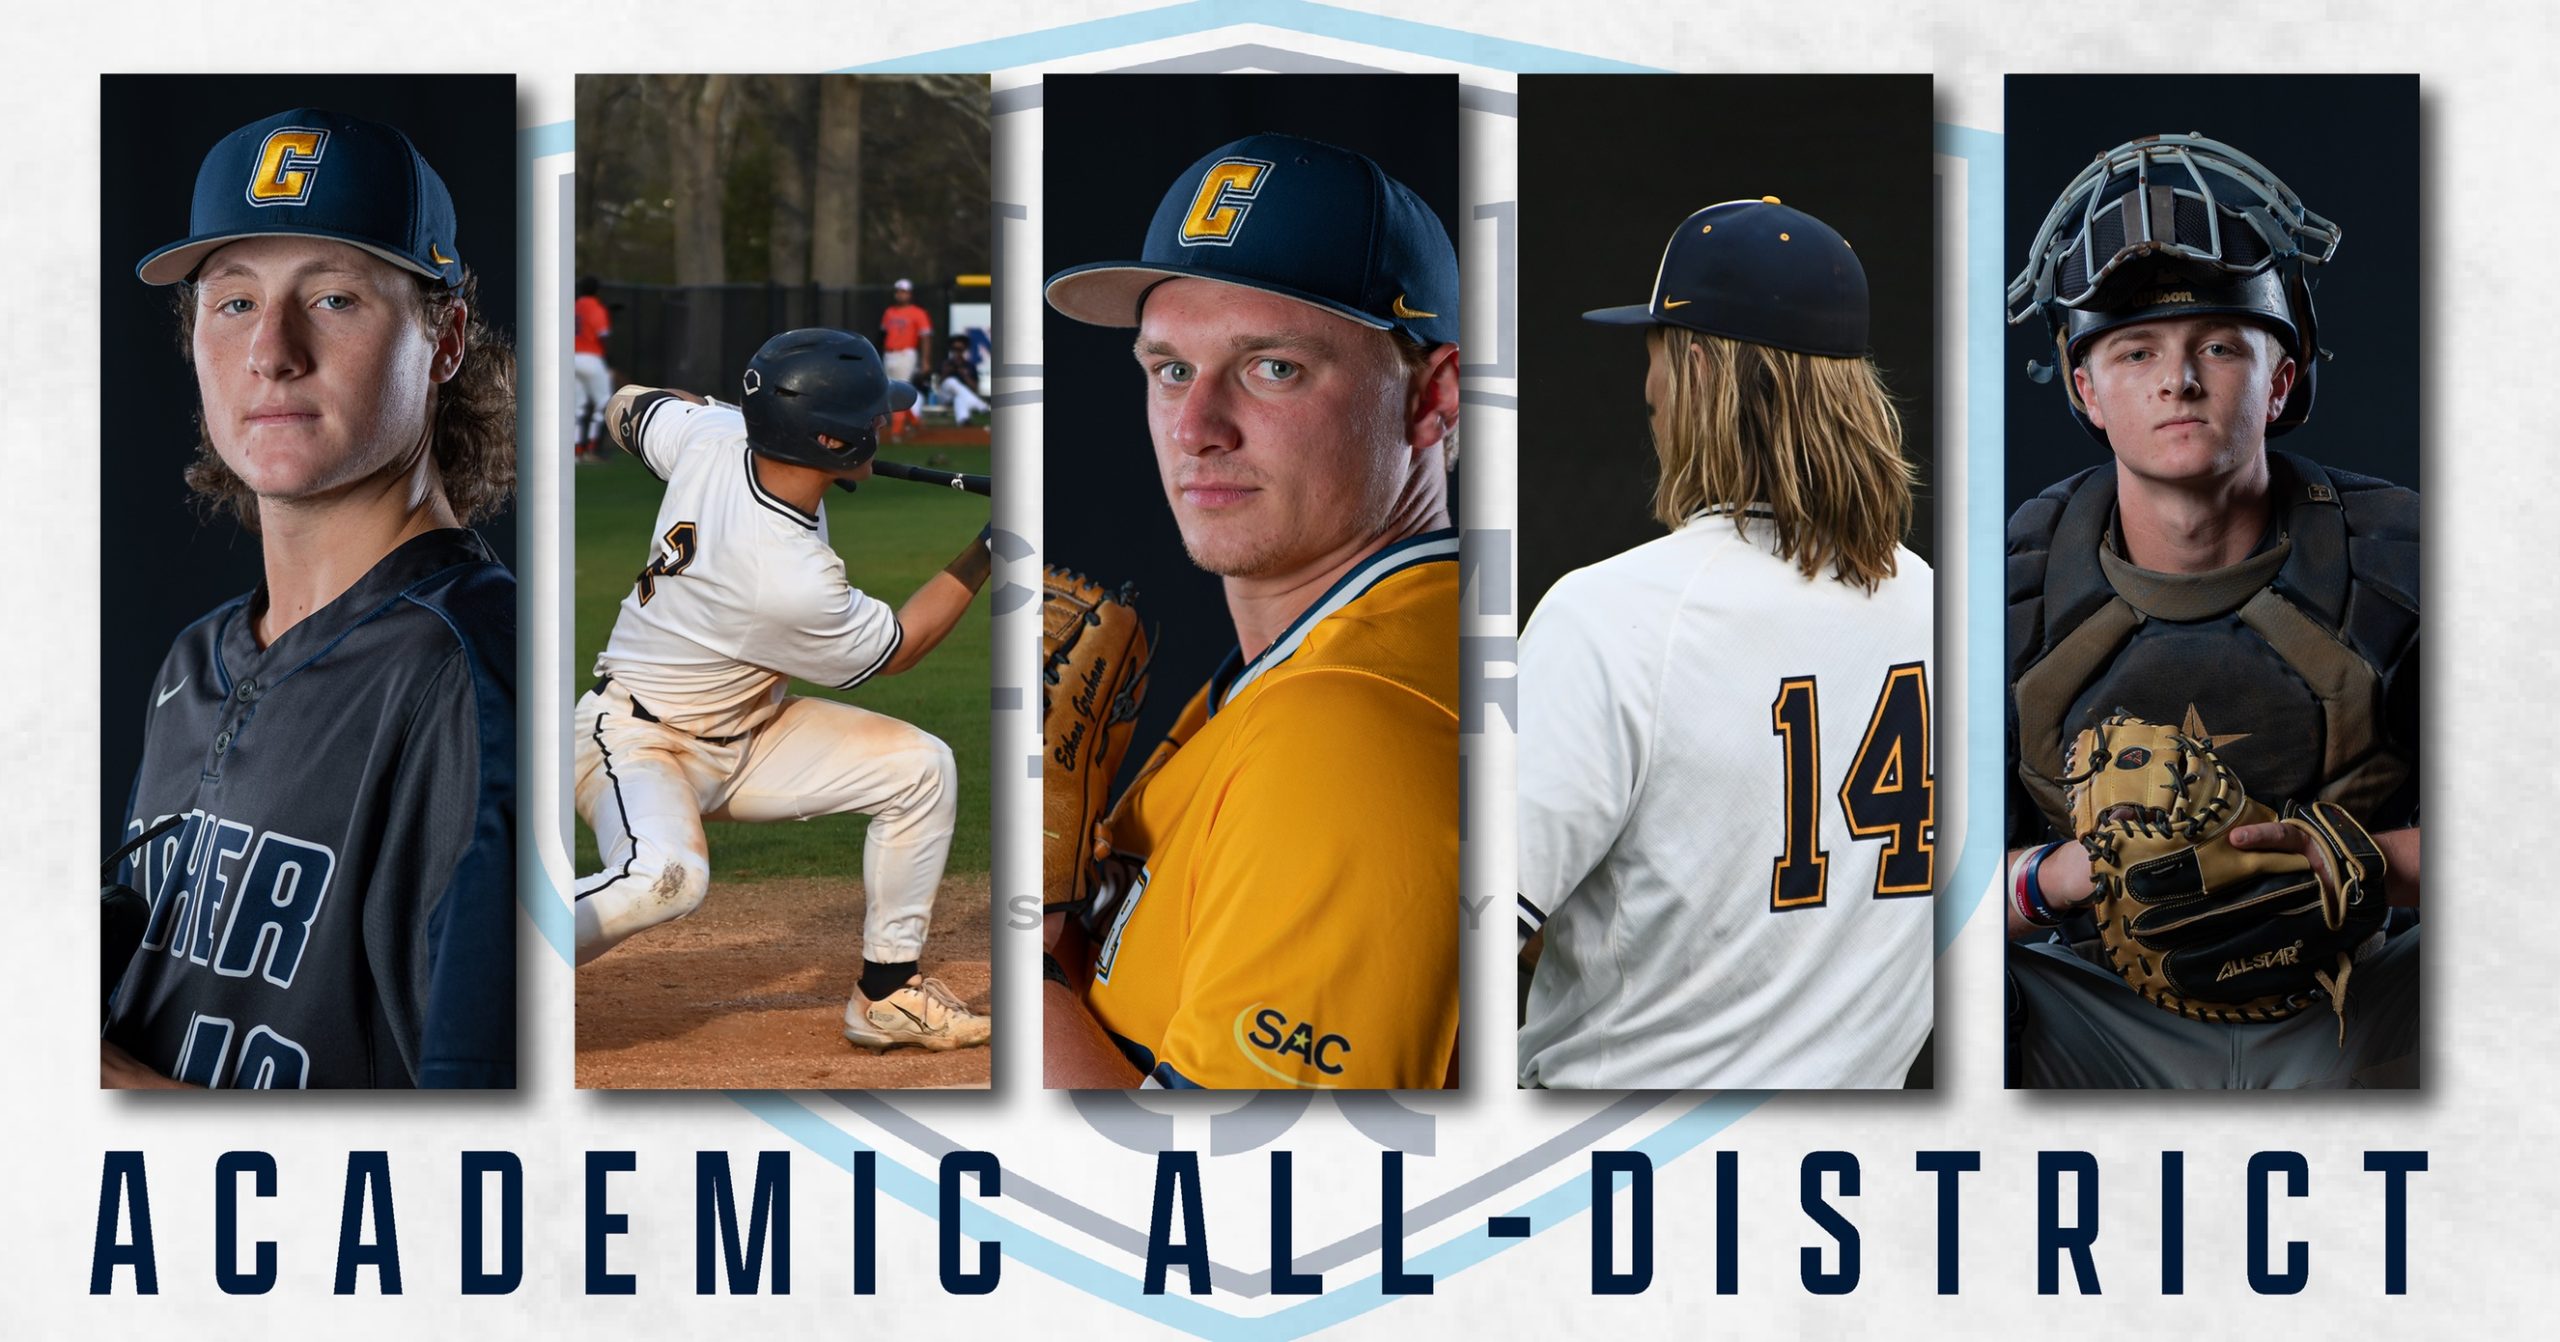  Five members of the Coker University baseball team have been named to the 2023 Academic All-District Baseball Team, as selected by the College Sports Communicators.